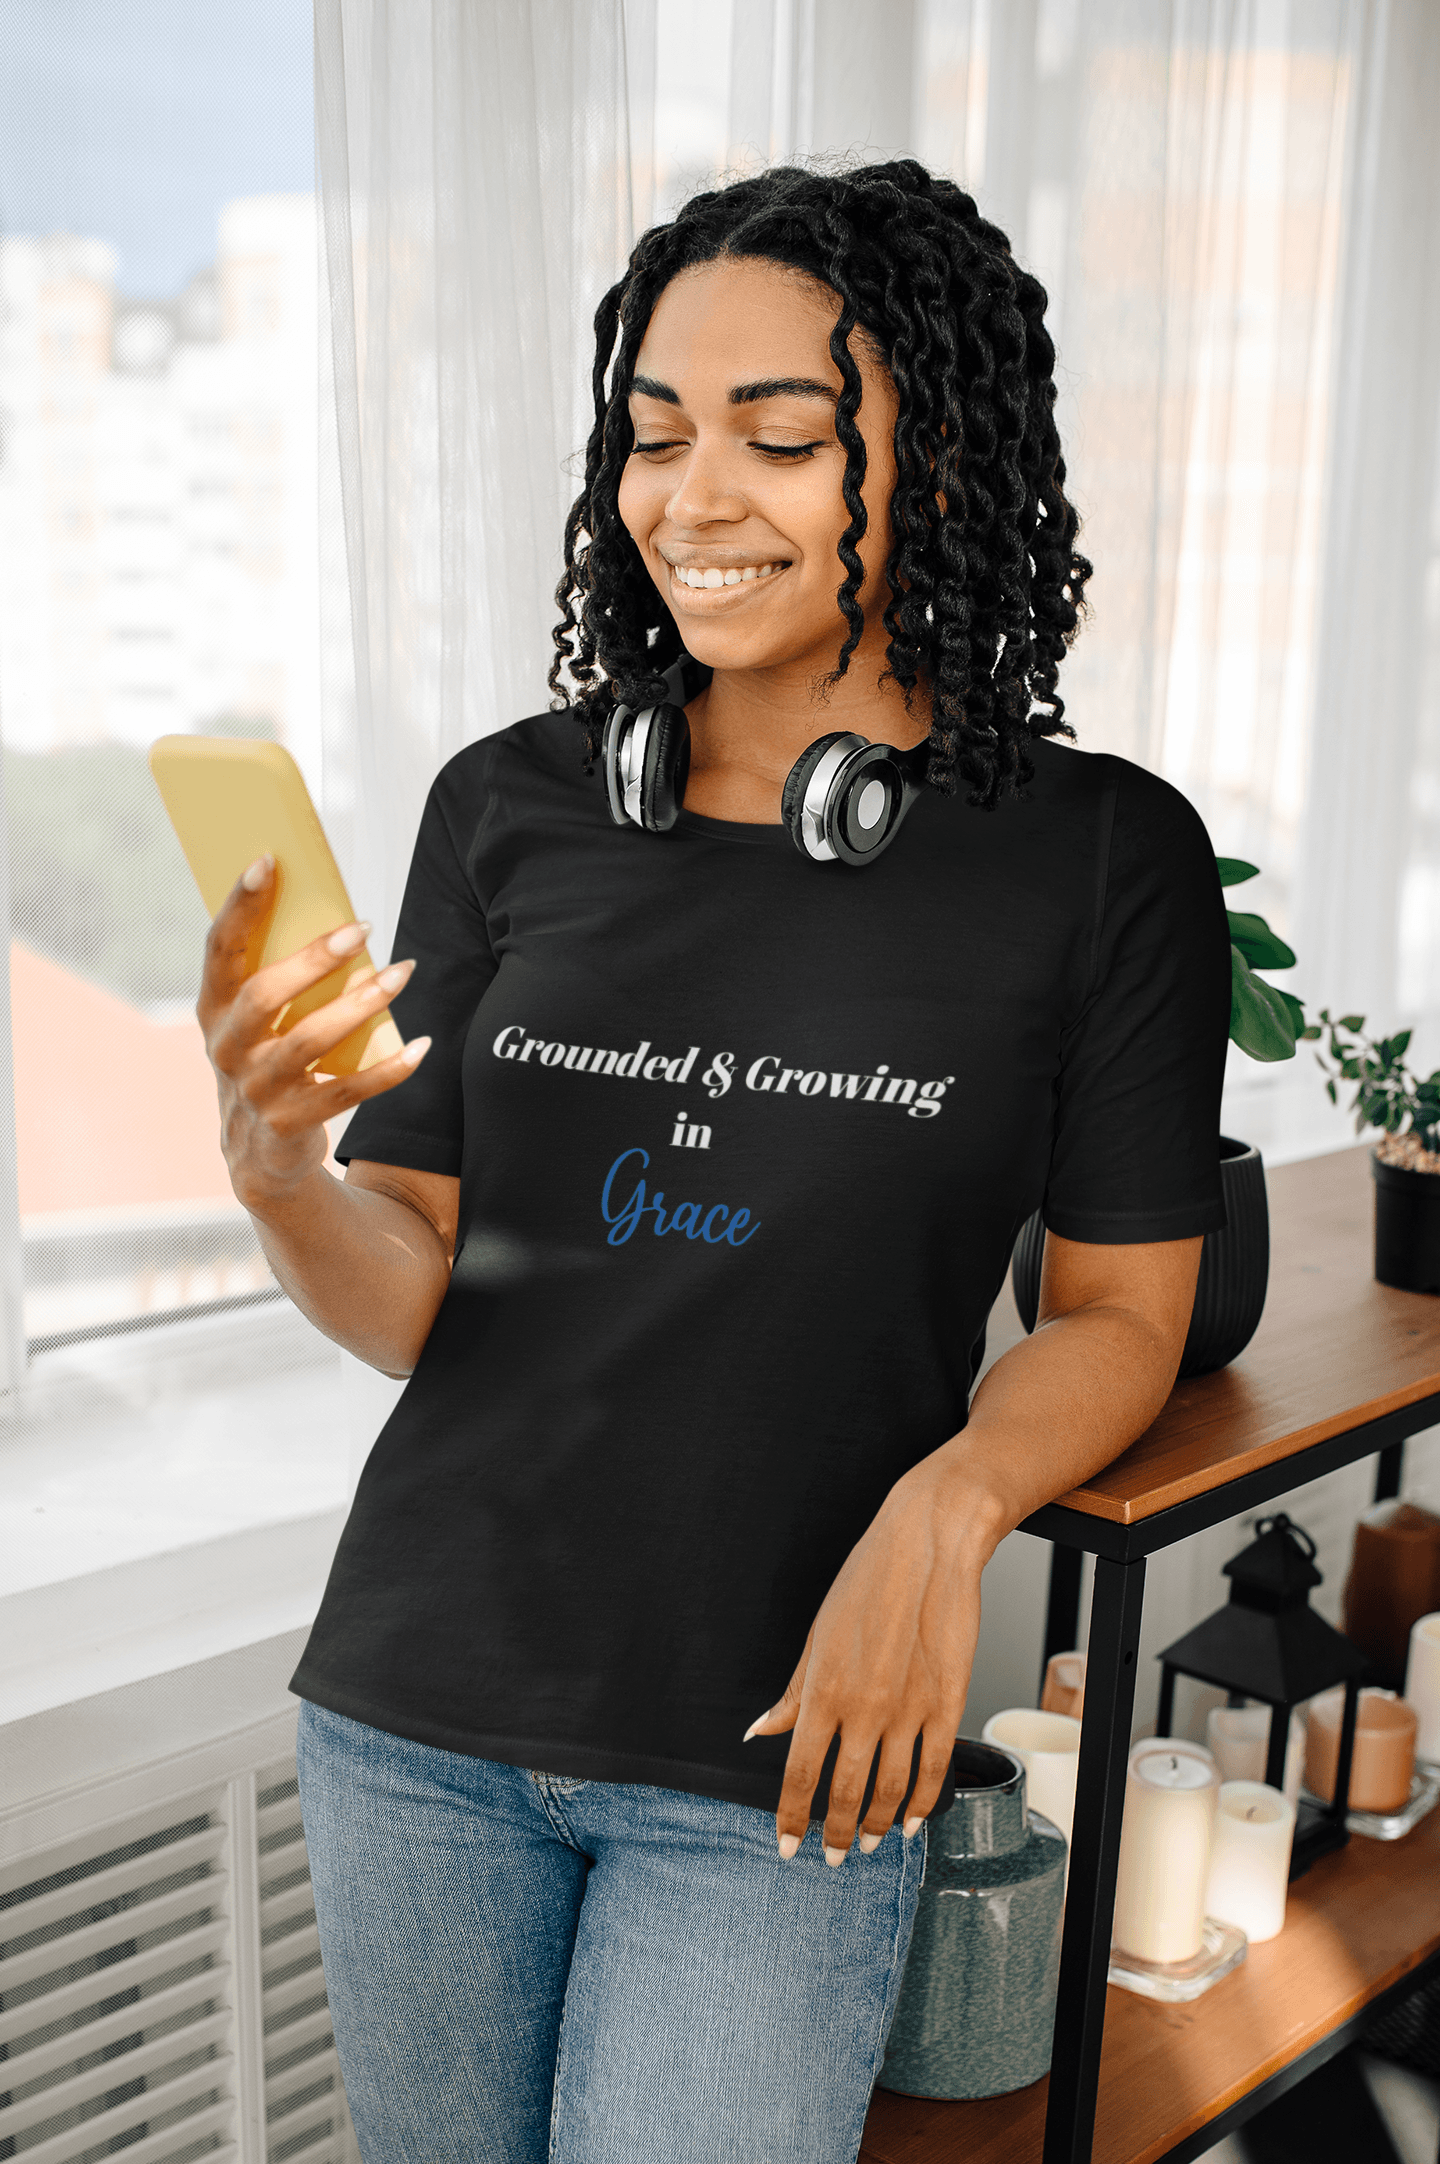 Grounded & Growing in Grace T-Shirt - Women Empowerment T-Shirts & Apparel | CP Designs Unlimited